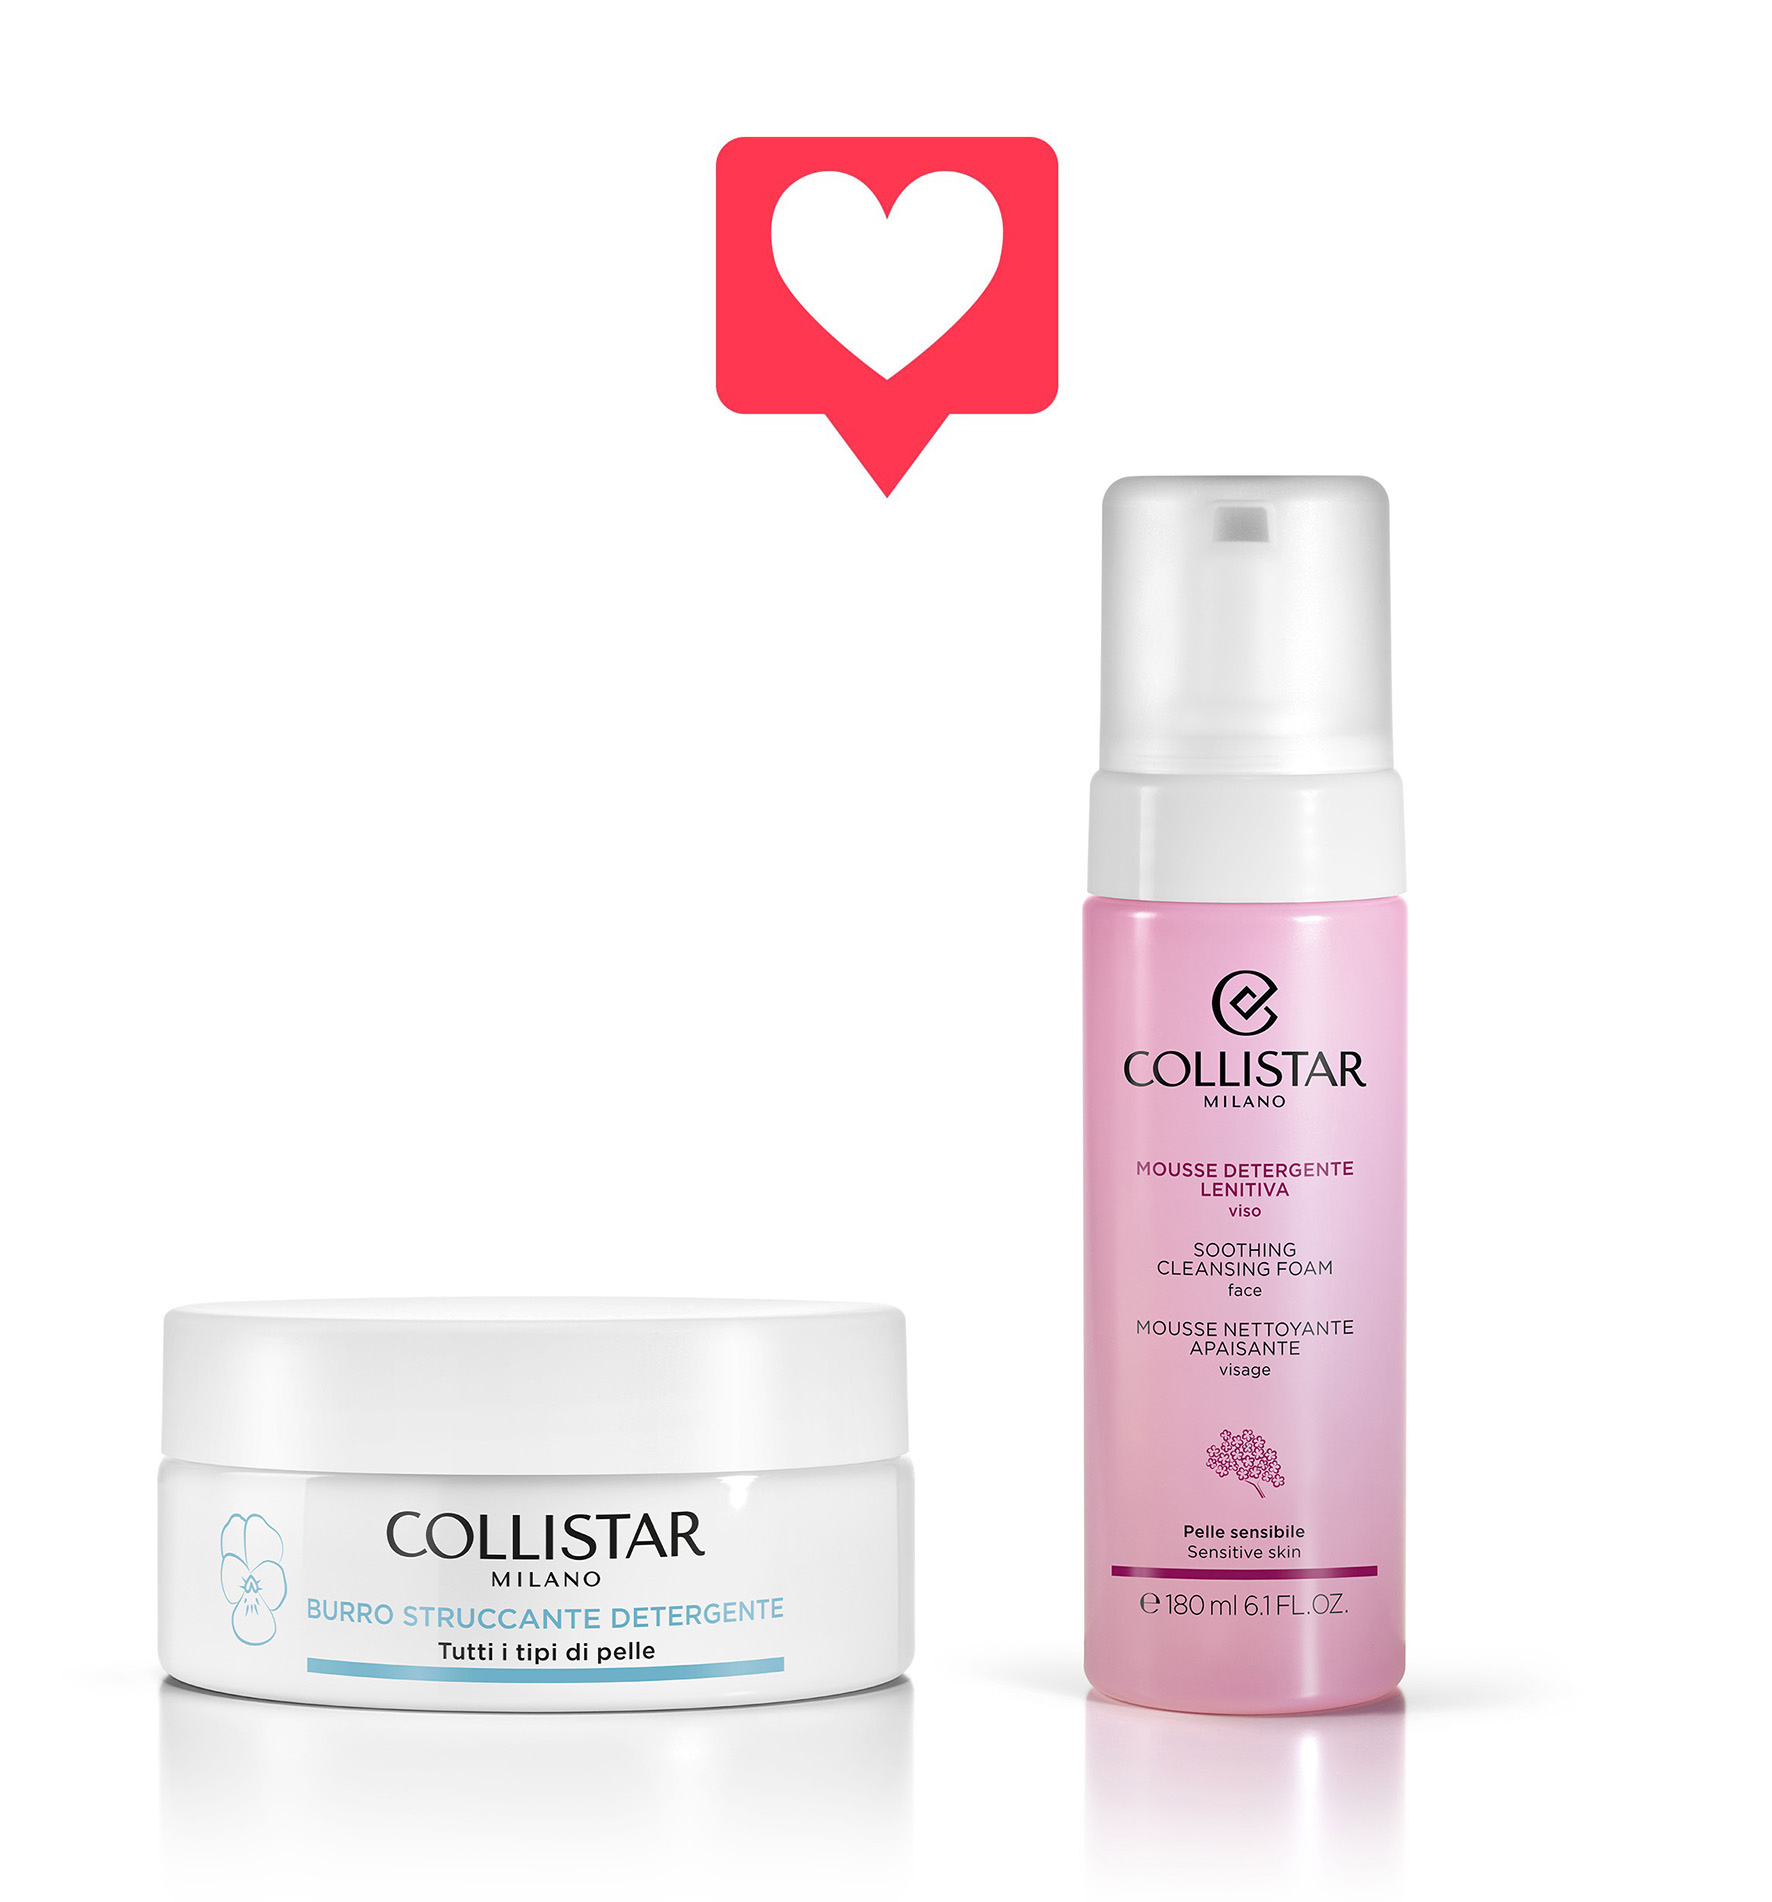 MAKE-UP REMOVING CLEANSING BALM + SOOTHING CLEANSING FOAM GEZICHT - VALENTIJN | Collistar - Shop Online Ufficiale